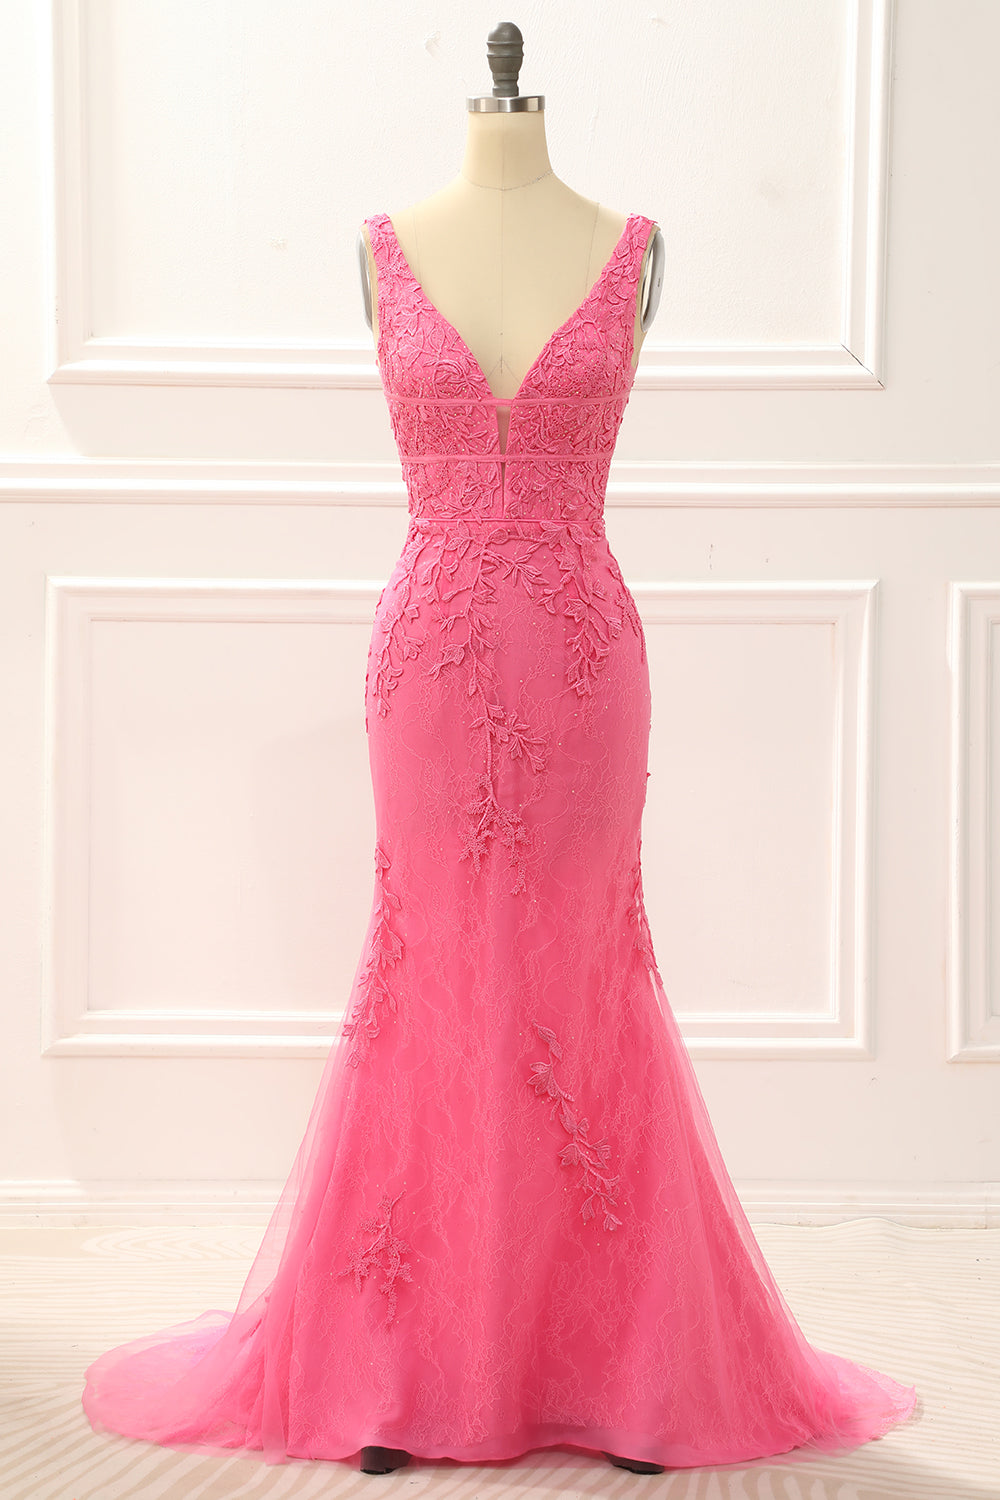 Chiclody Women Hot Pink Mermaid Prom Dress with Appliques V-neck Party ...